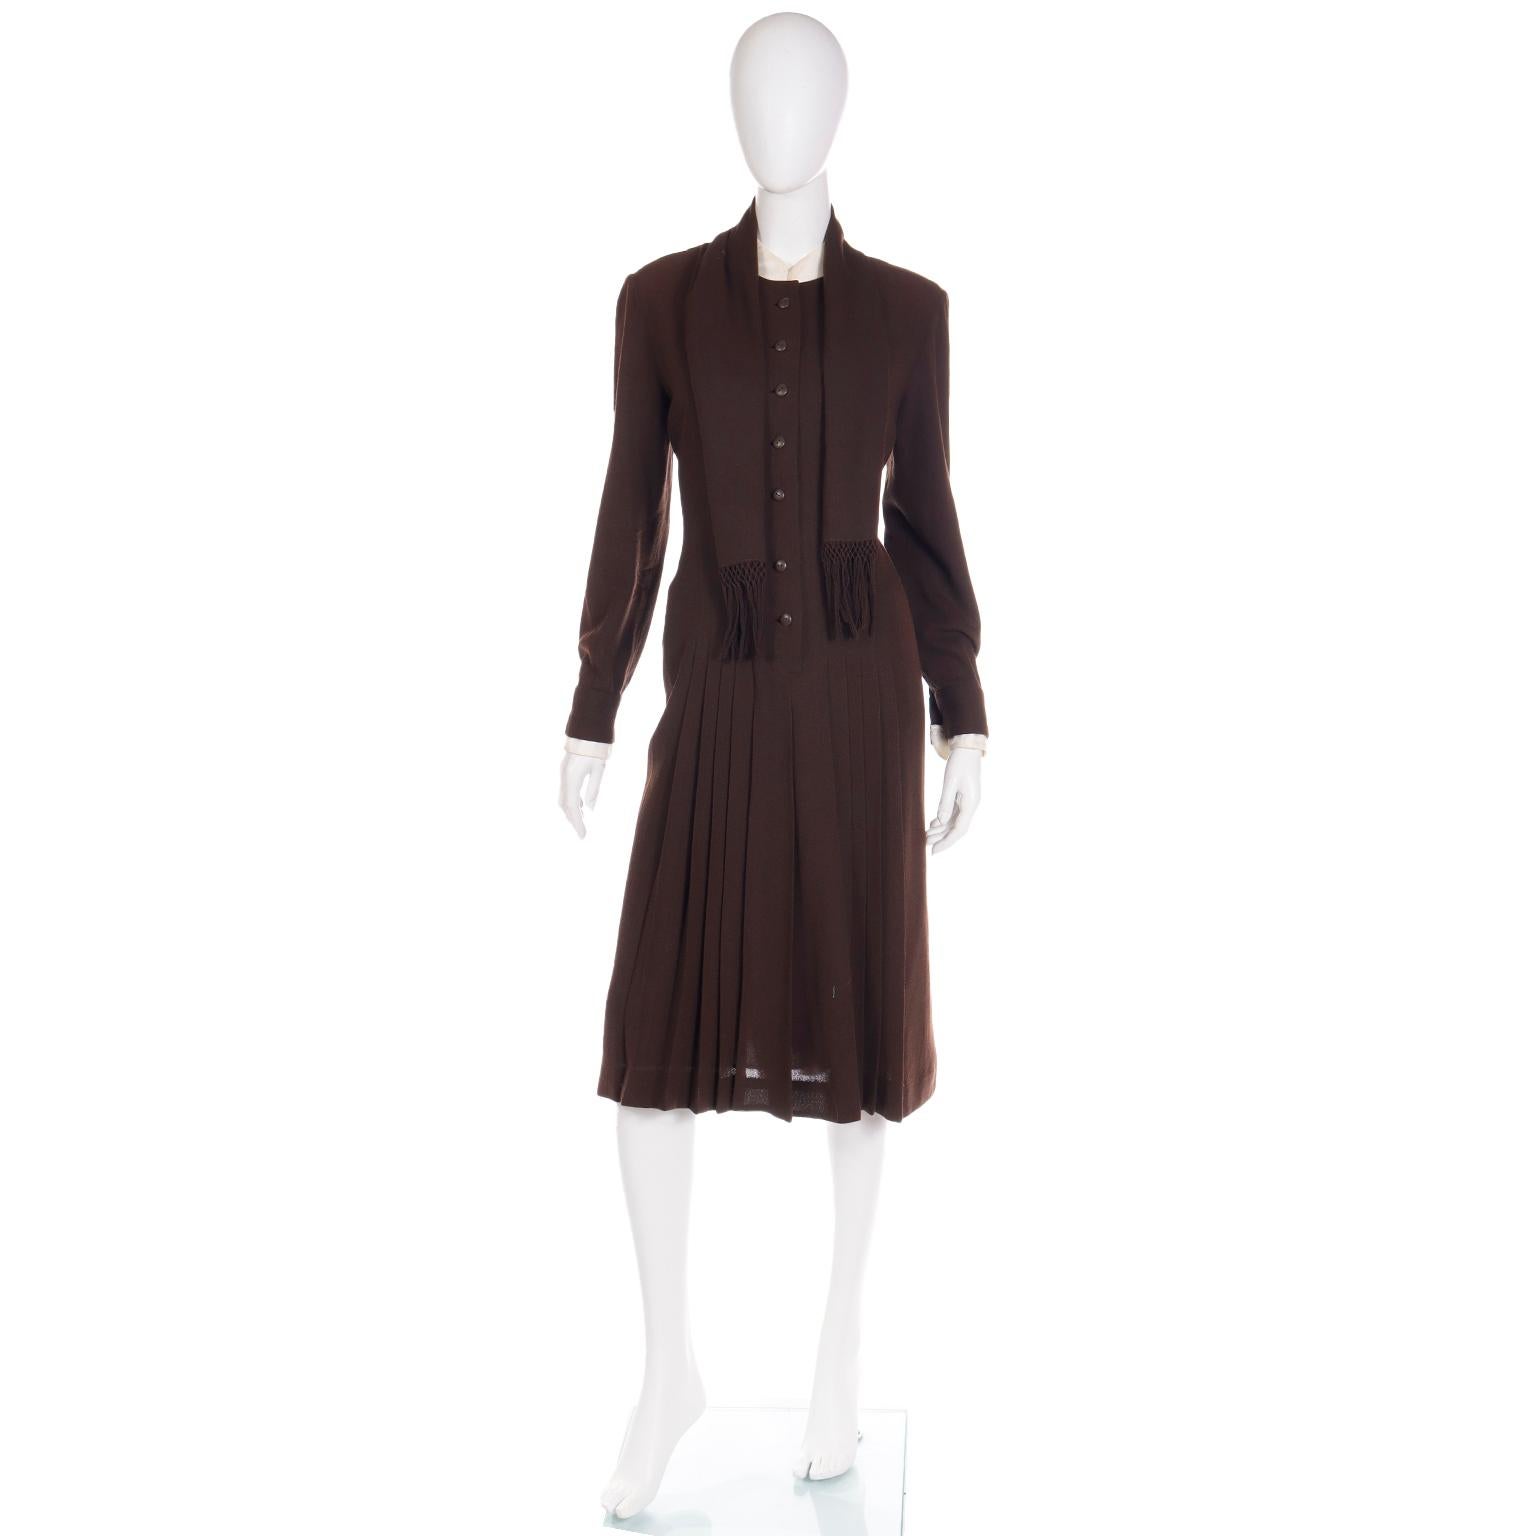 This ultra chic, sophisticated vintage dress was made by Jean Louis For I. Magnin in the late 1970's. We acquired this dress from a prominent estate that had nothing but exceptional high end designer vintage clothing from the 1960's through the